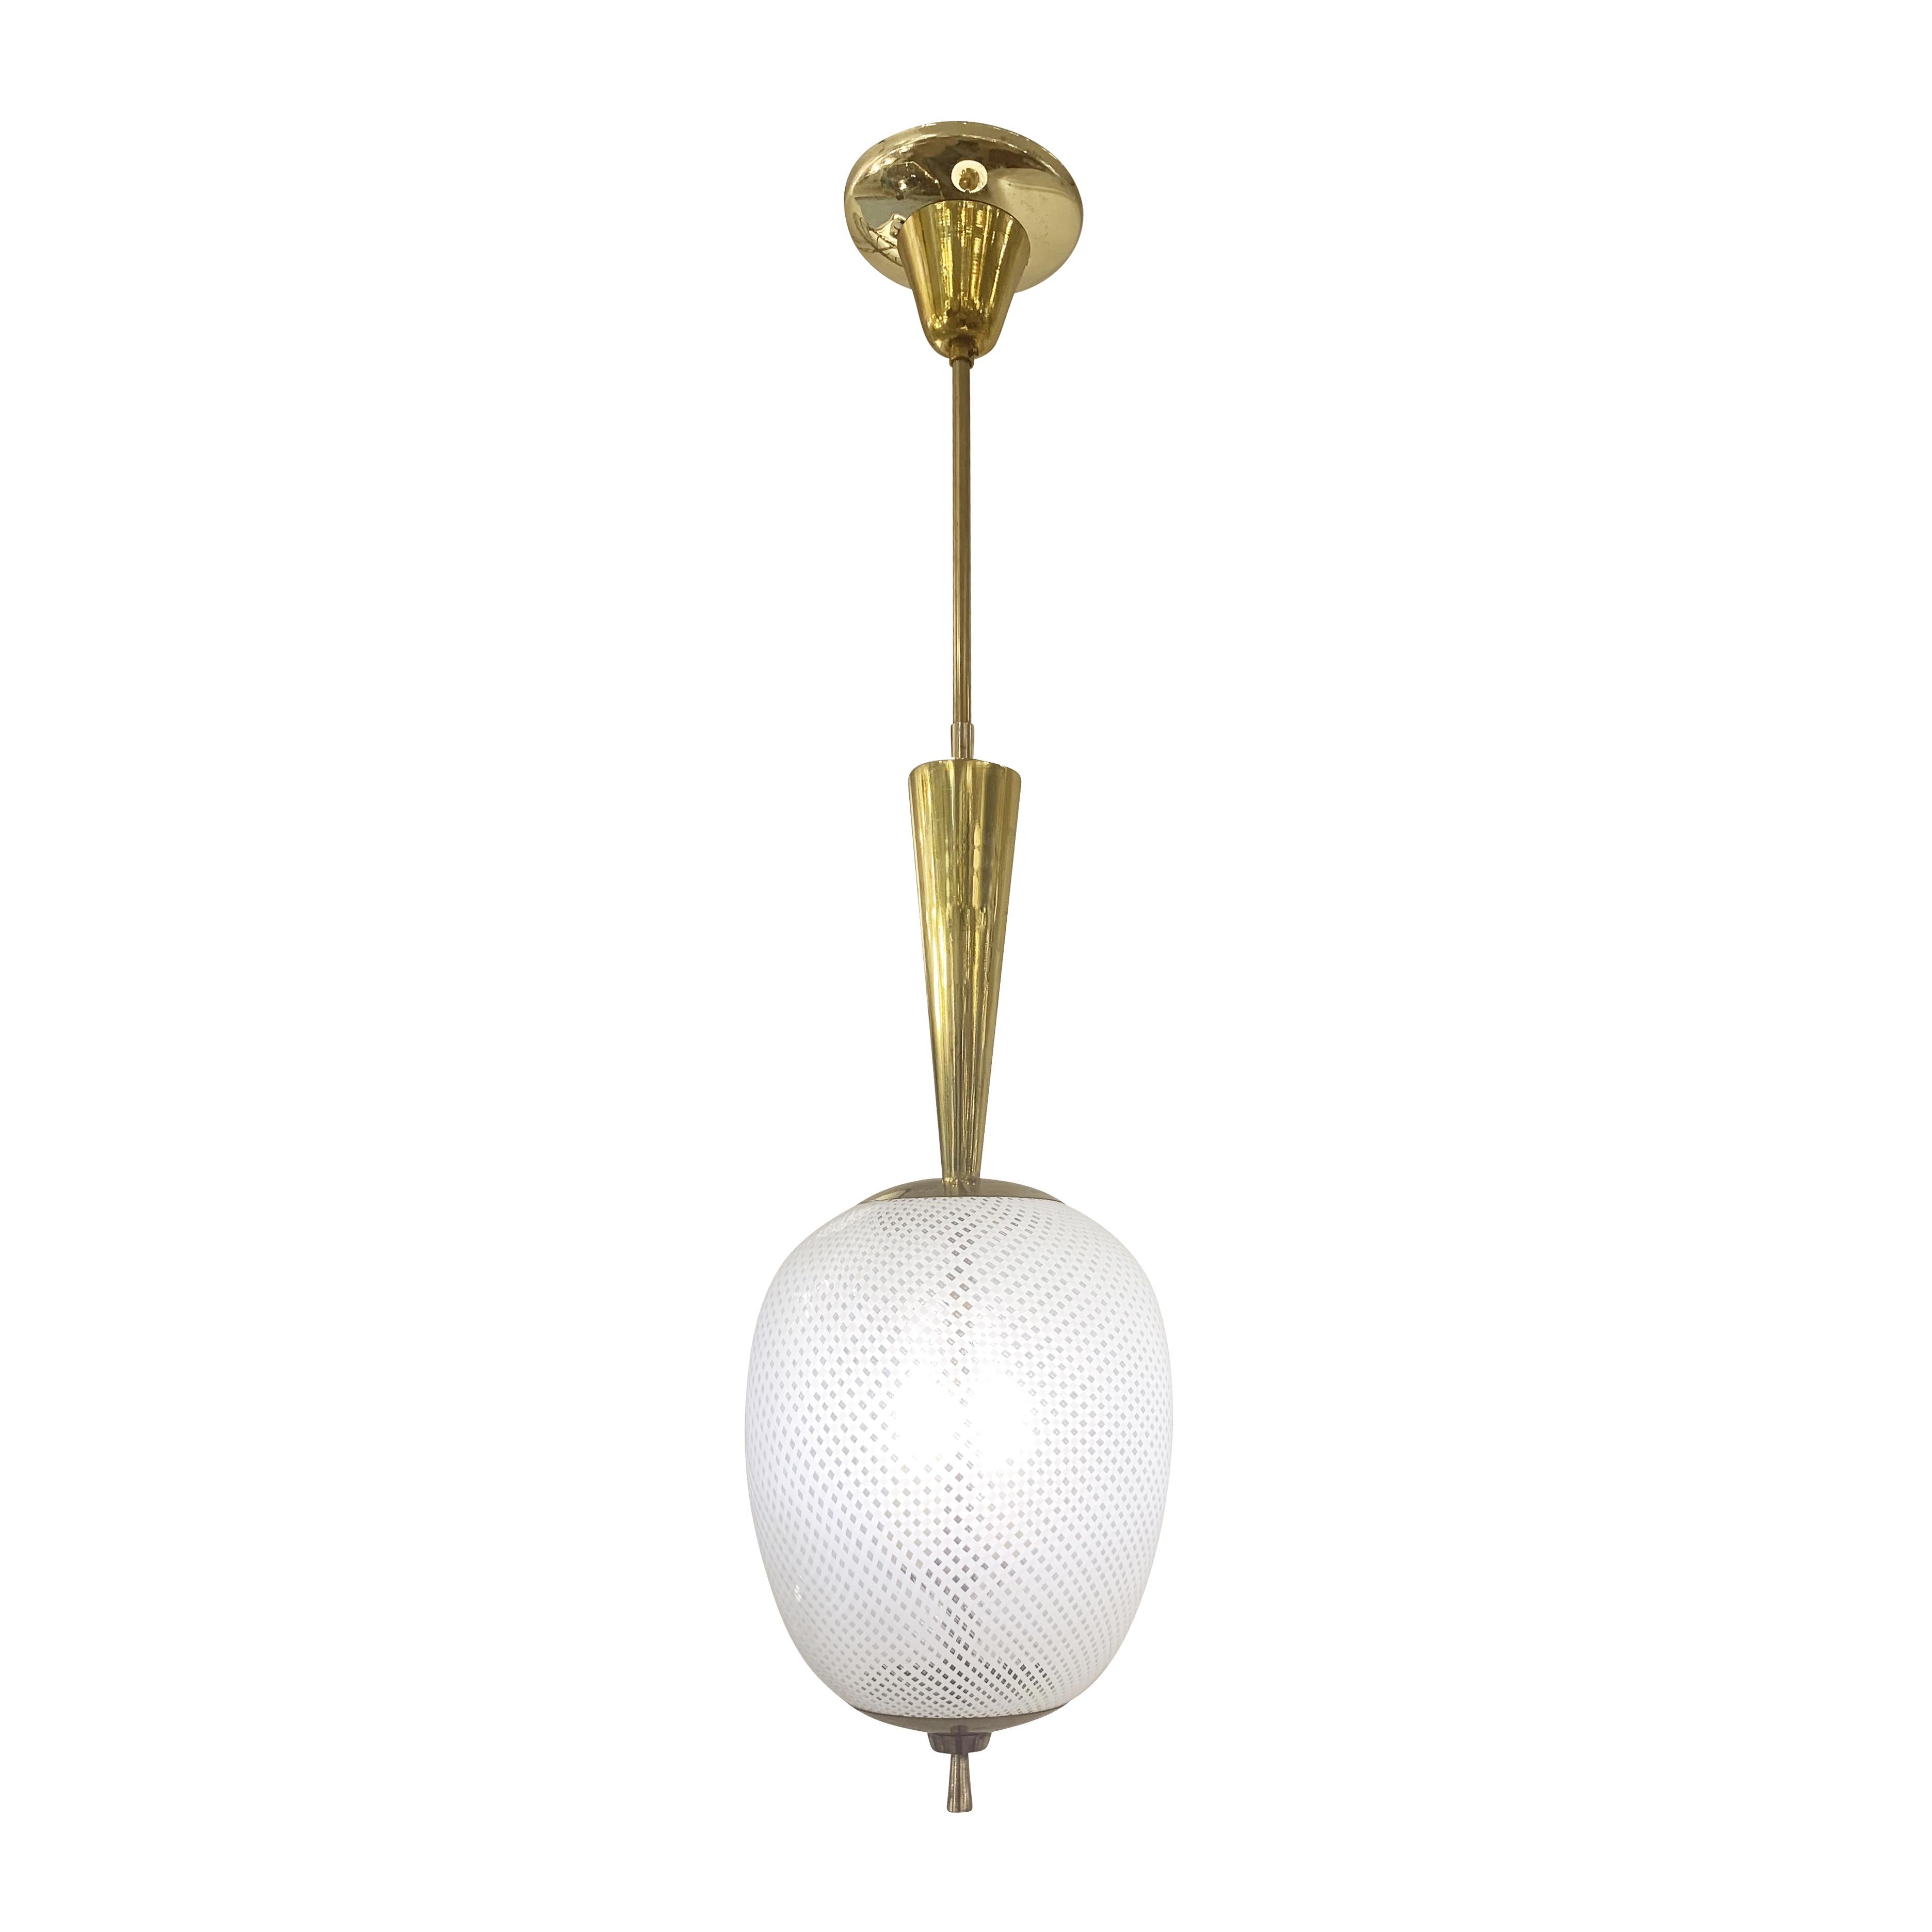 Petite Mid-Century pendant by Venini made in the “Reticello” Murano glass blowing technique. Brass hardware-length of stem can be adjusted upon request.

Condition: Excellent vintage condition, minor wear consistent with age and use.

Diameter: